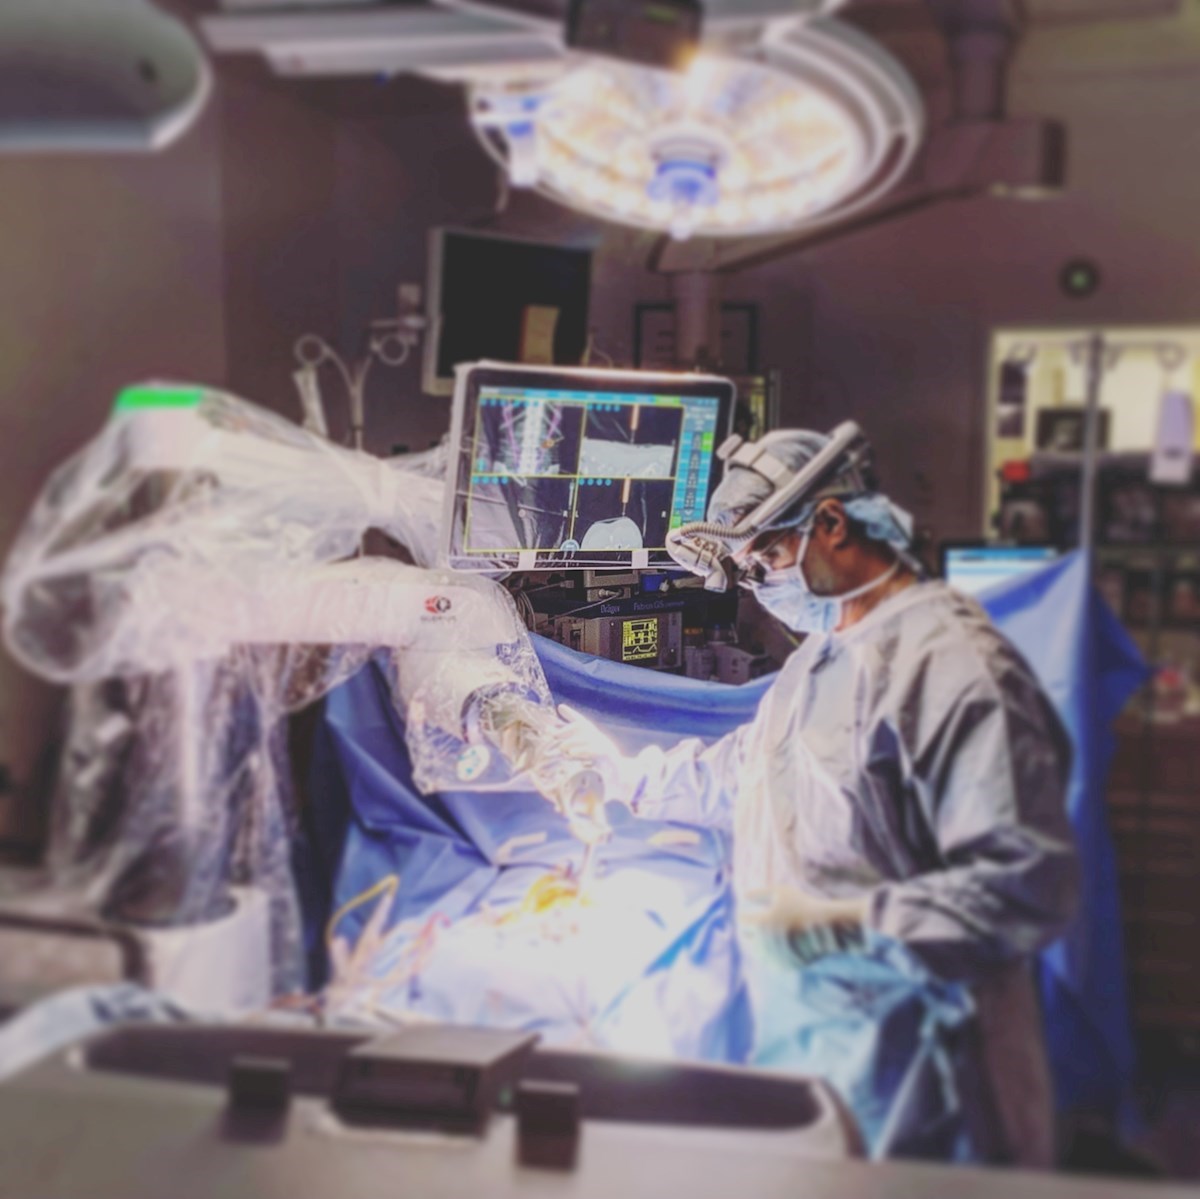 Dr. Ian Madom makes history with robotic-assisted spine surgery